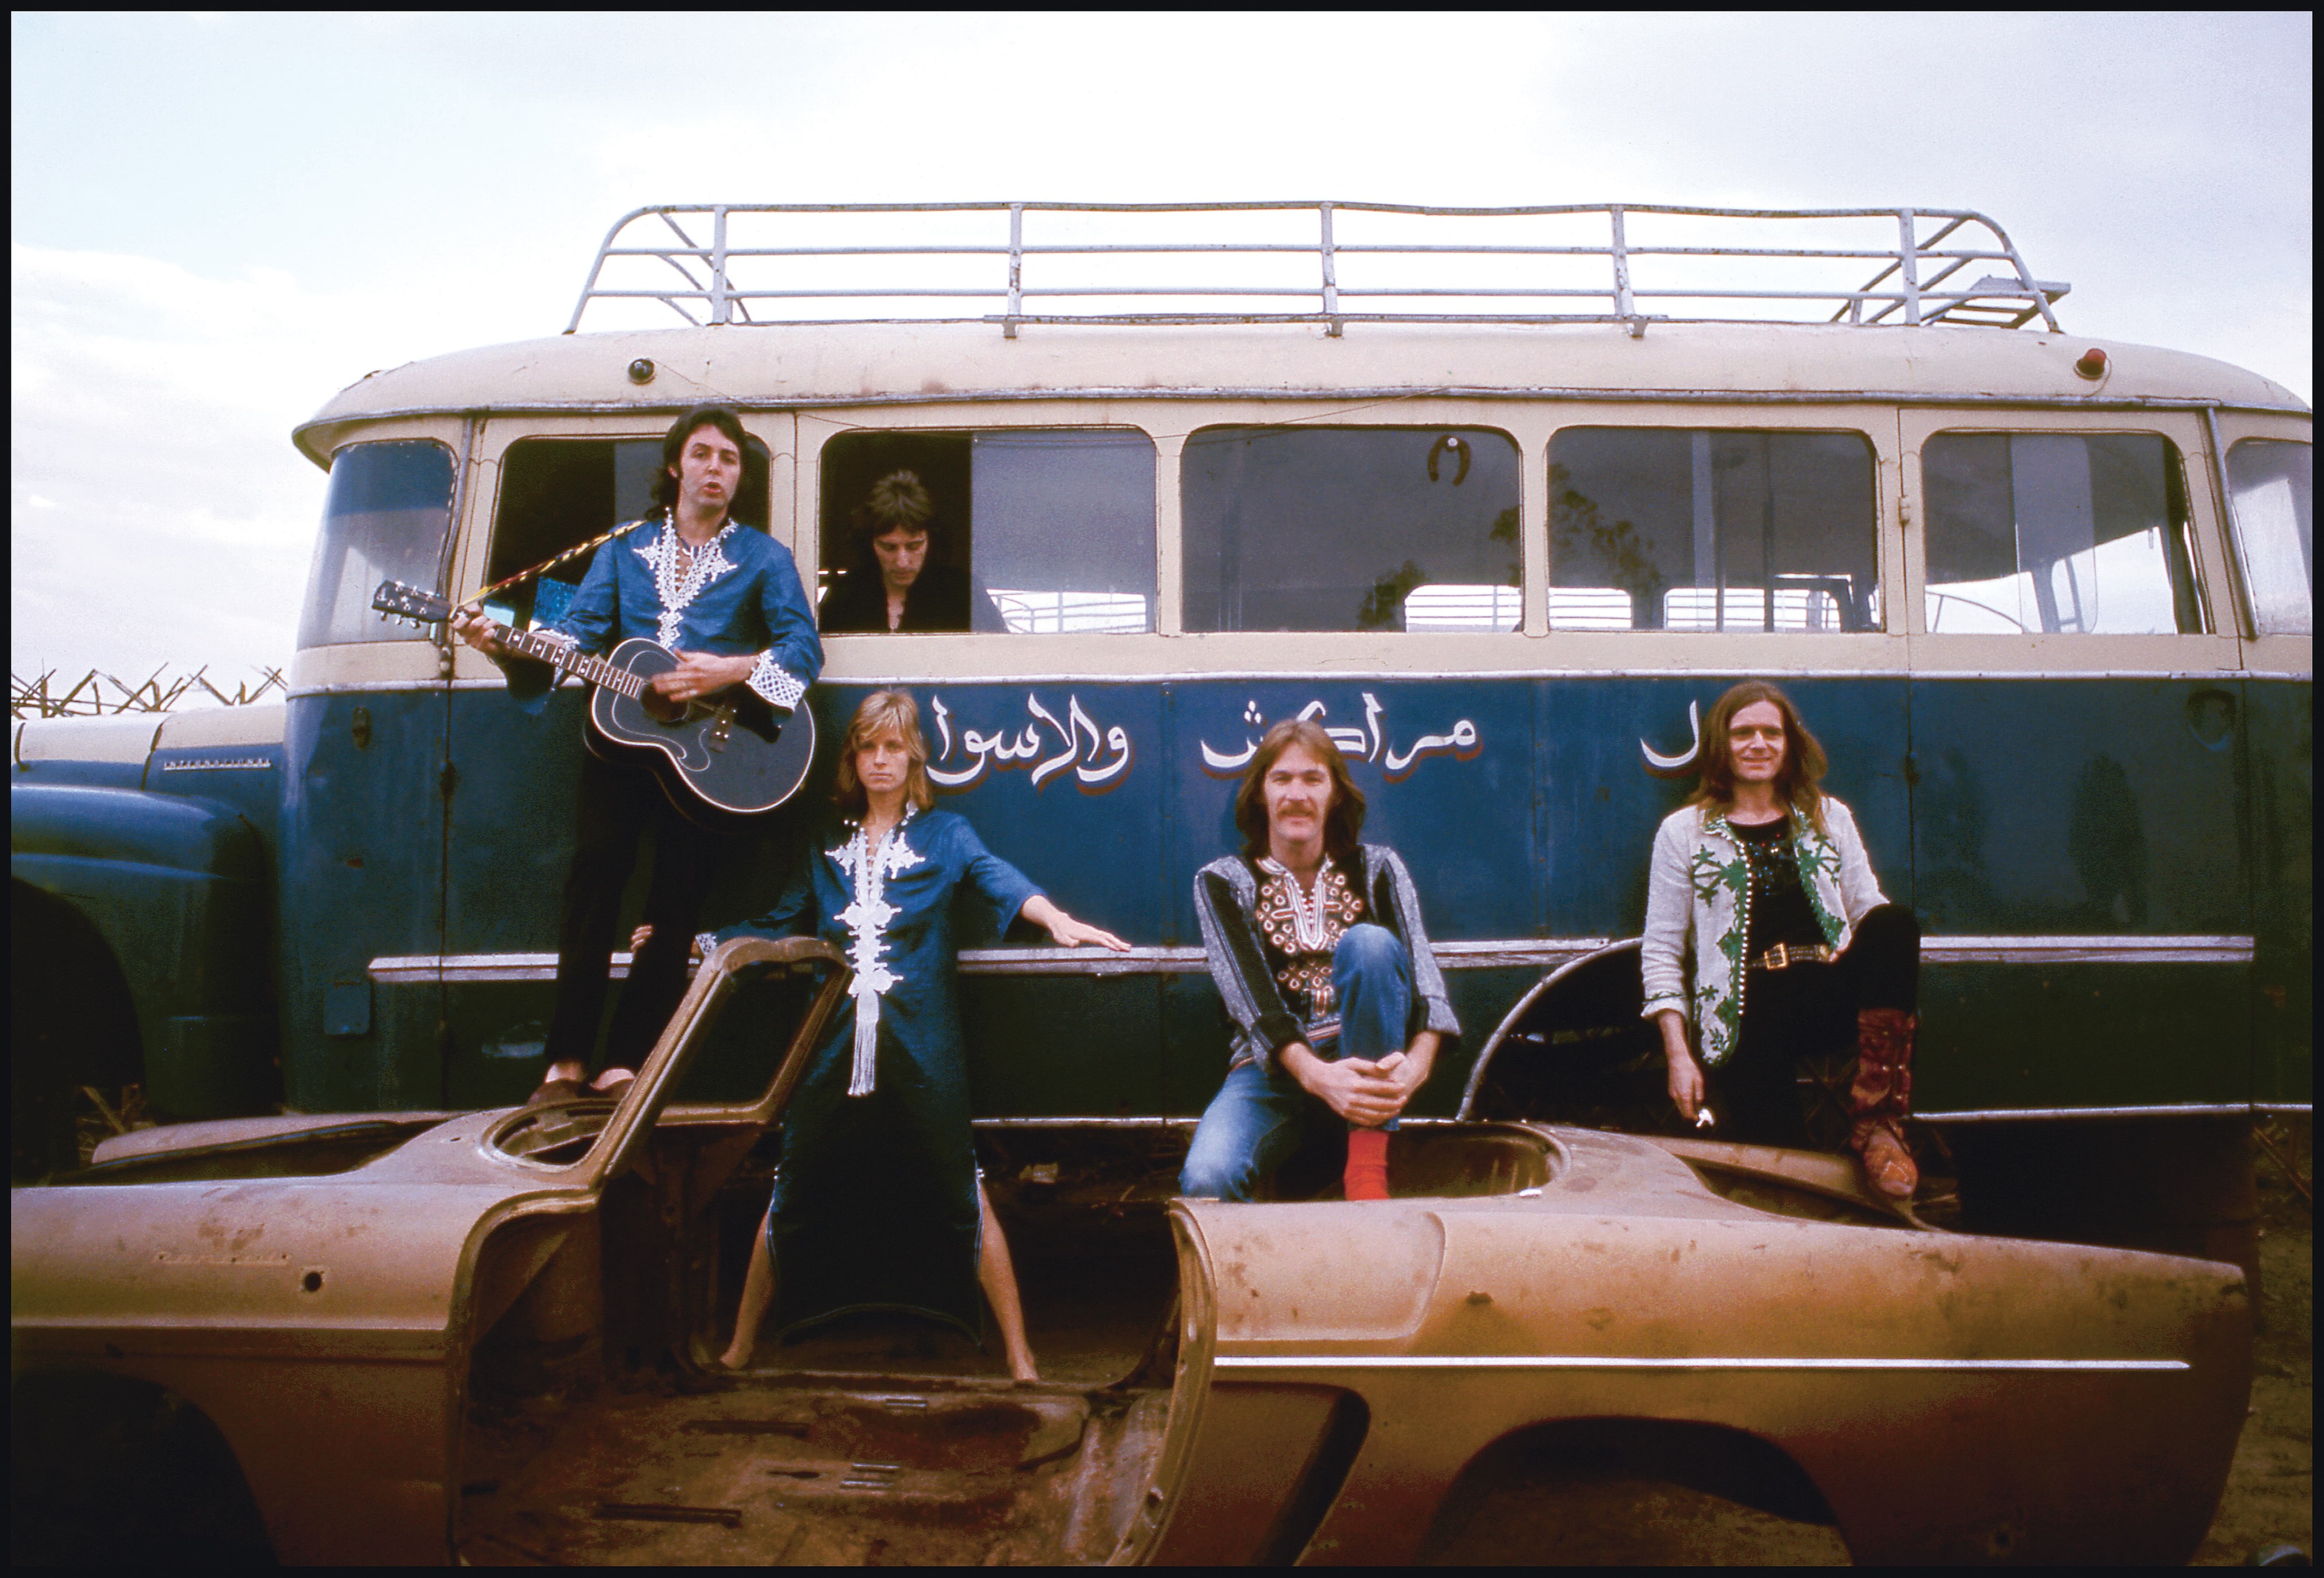 Wings stand in front of a blue camper van